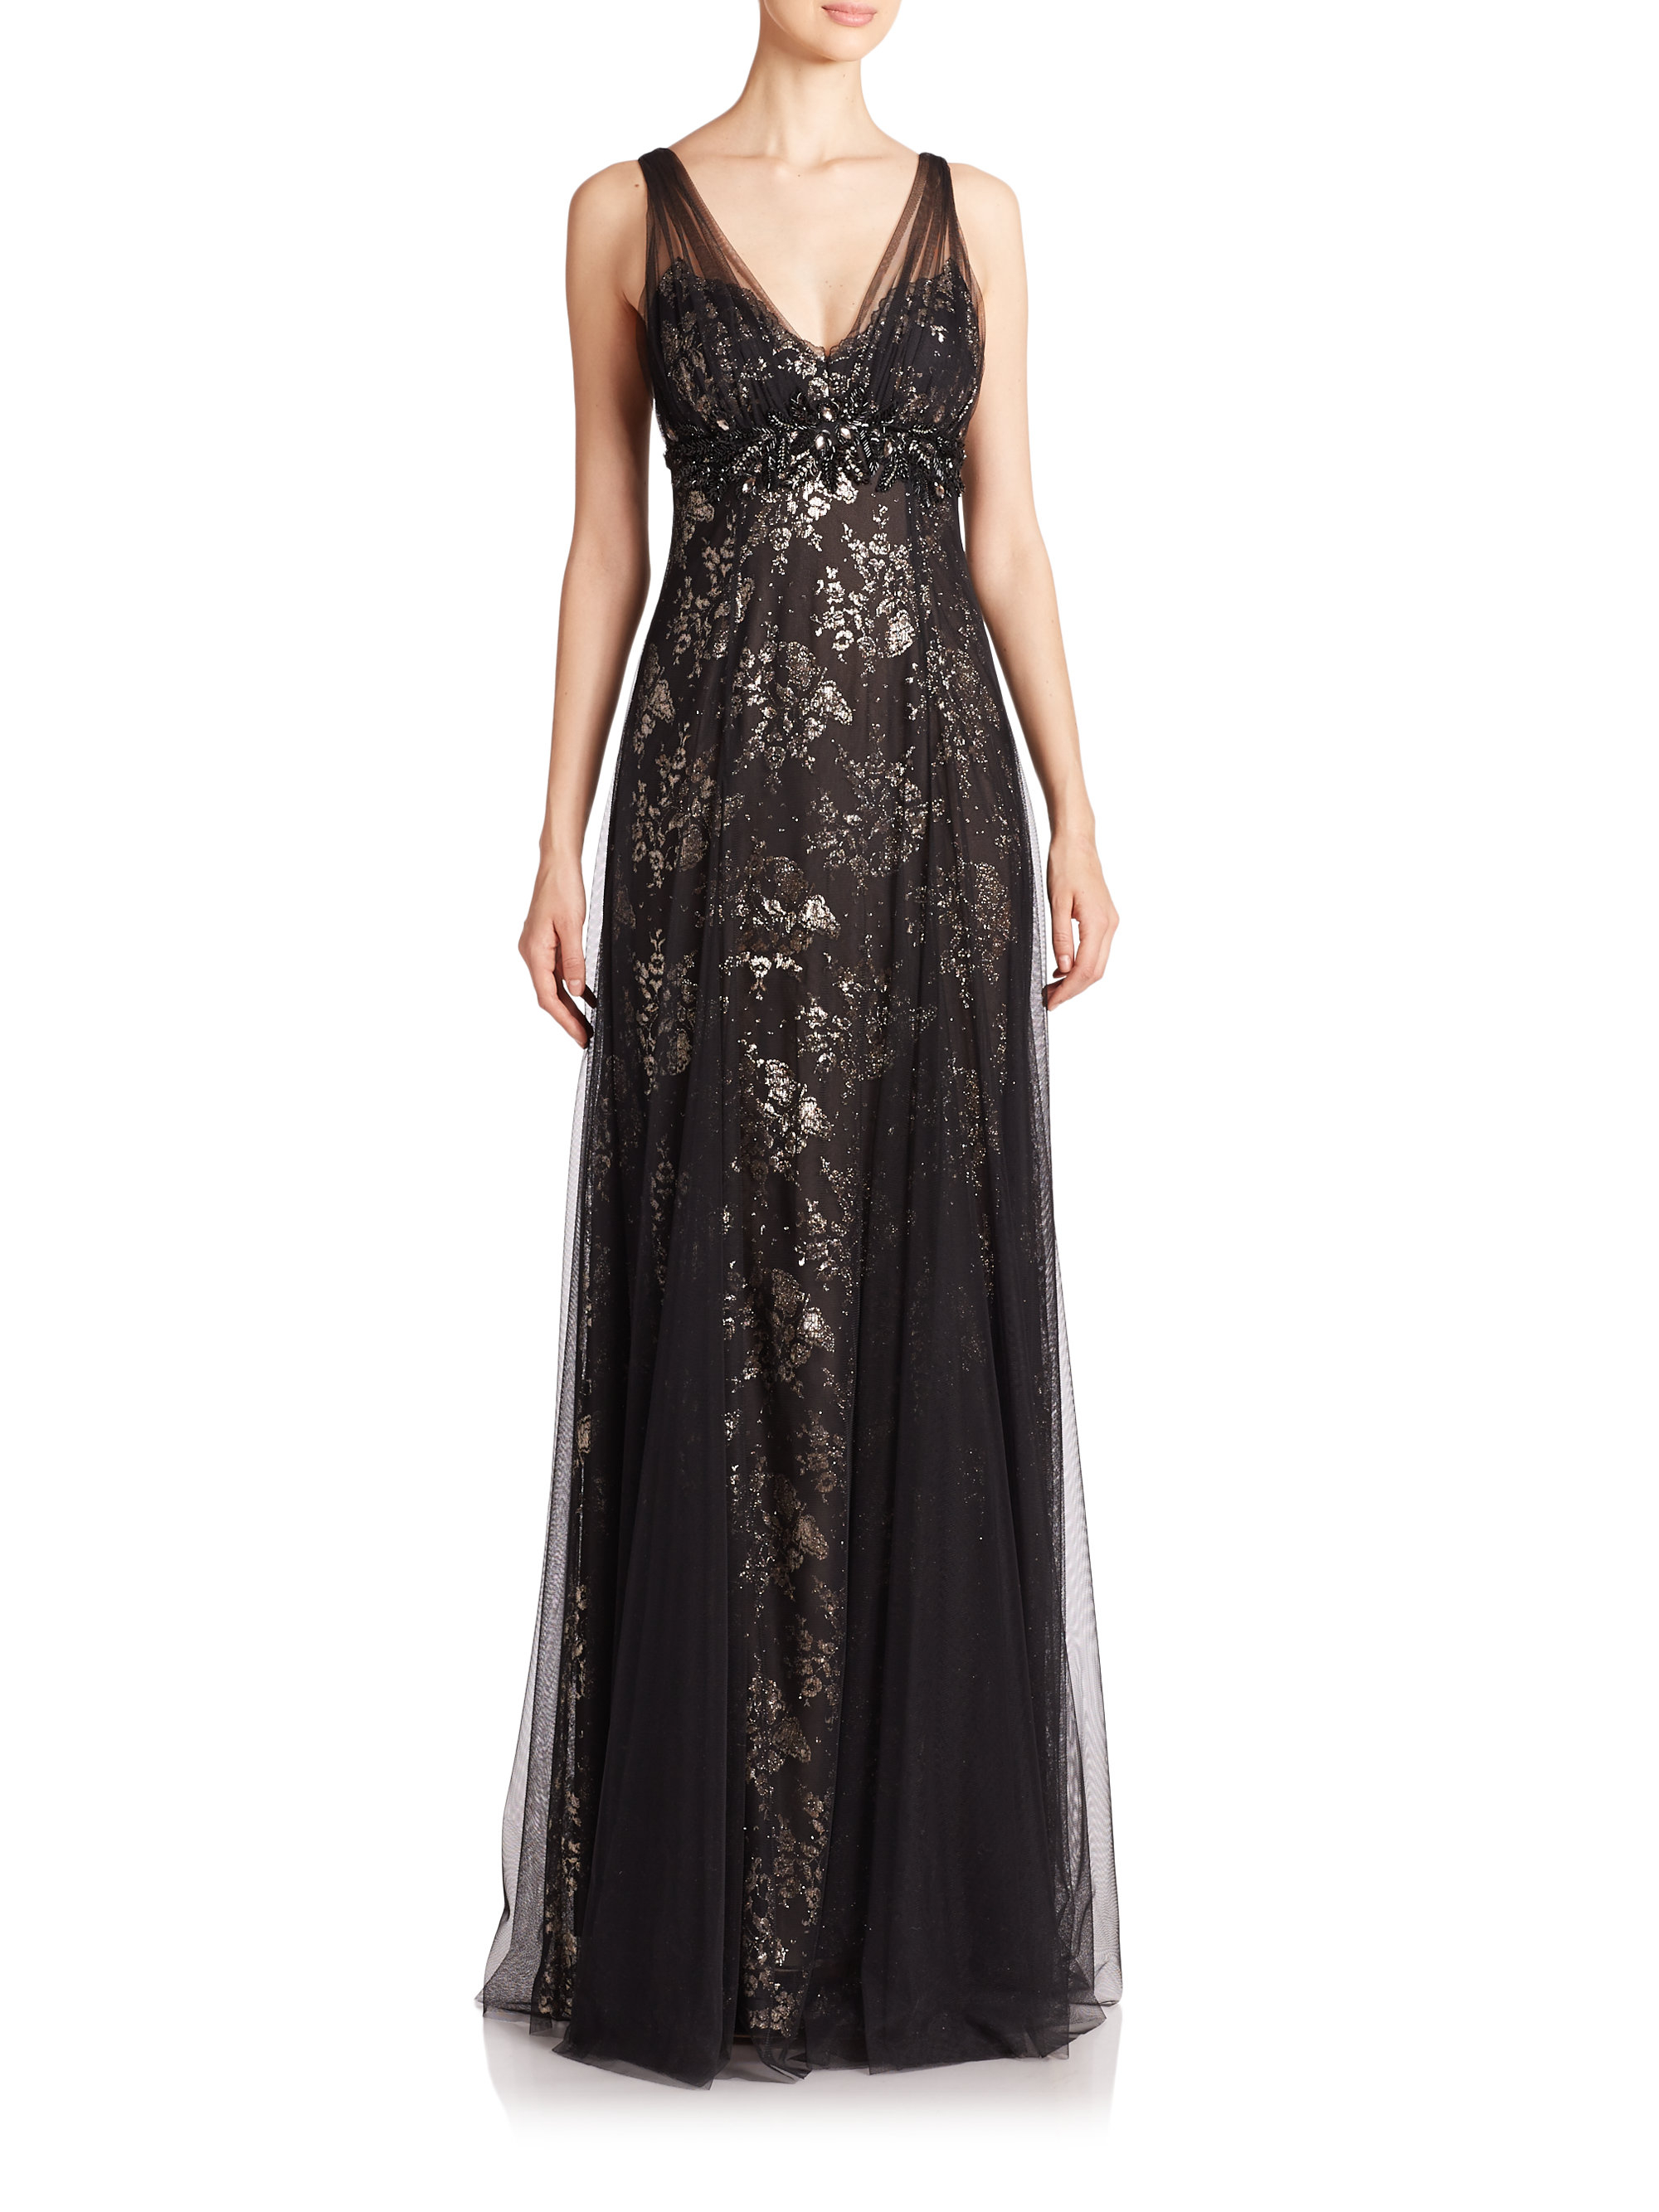 Lyst - Notte By Marchesa Metallic Lace Draped Gown in Black